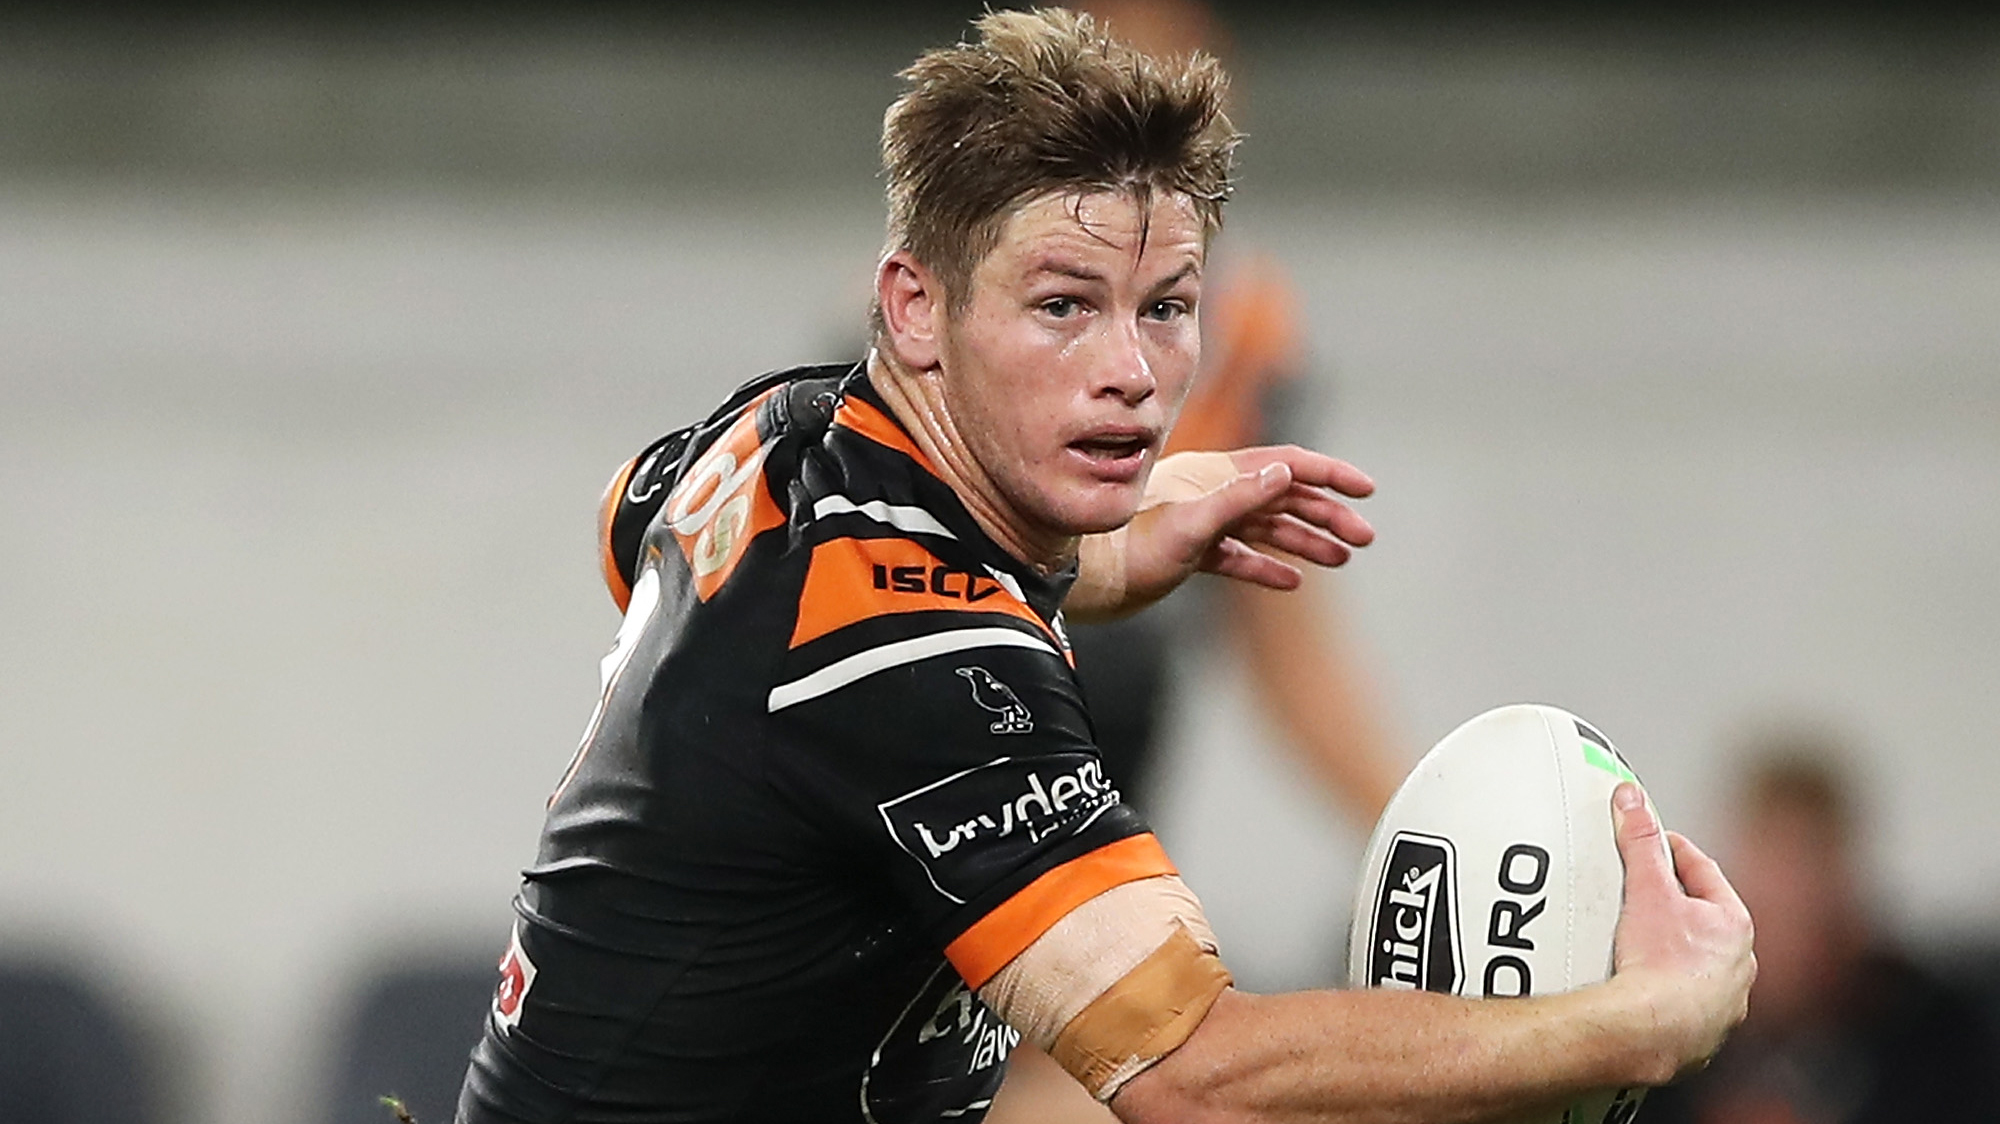 Harry Grant won’t be at Tigers in 2021, despite rookie’s “special year” in the orange and black